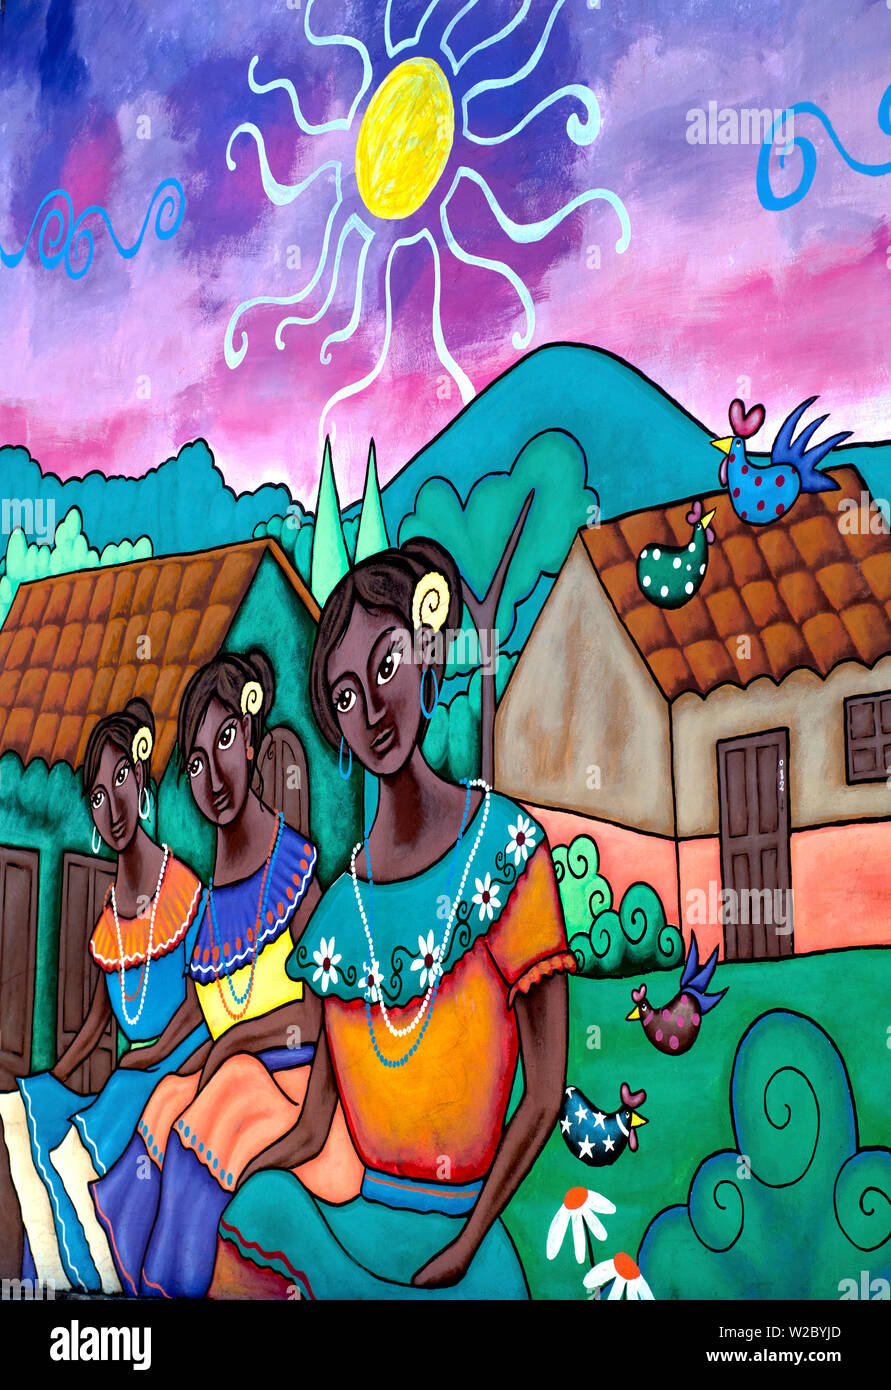 Ataco, El Salvador, Wall Mural, Traditional Village Scene, Famous For Its Wall Murals, Route Of Flowers, Rutas De Las Flores, Department Of Ahuachapan Stock Photo